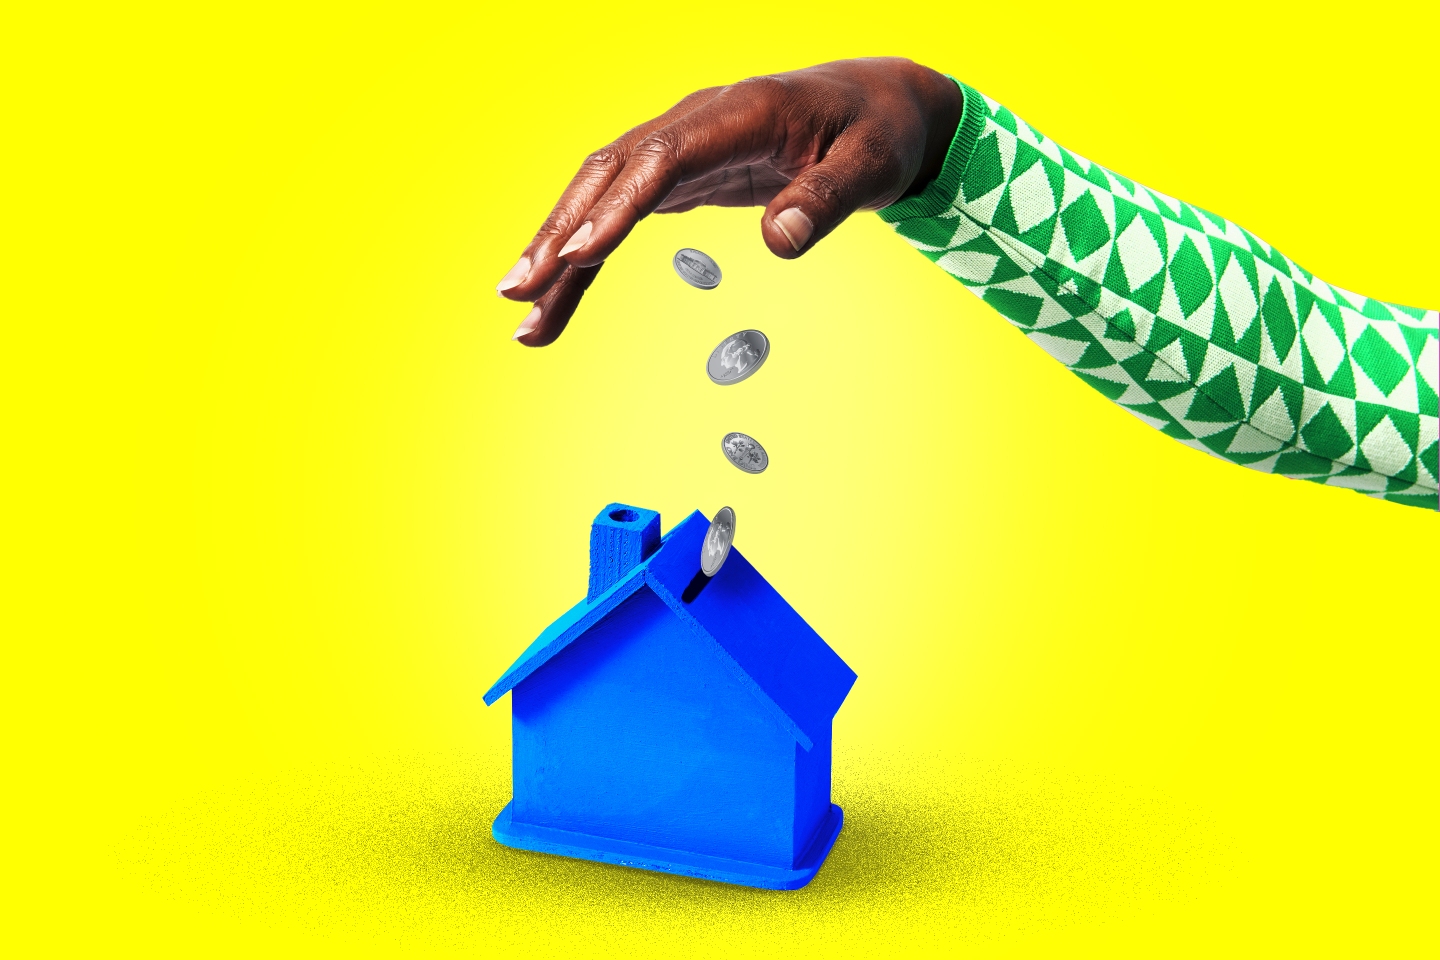 Photo illustration of a woman's hand dropping coins into a small blue wooden house with a coin slot in the roof.